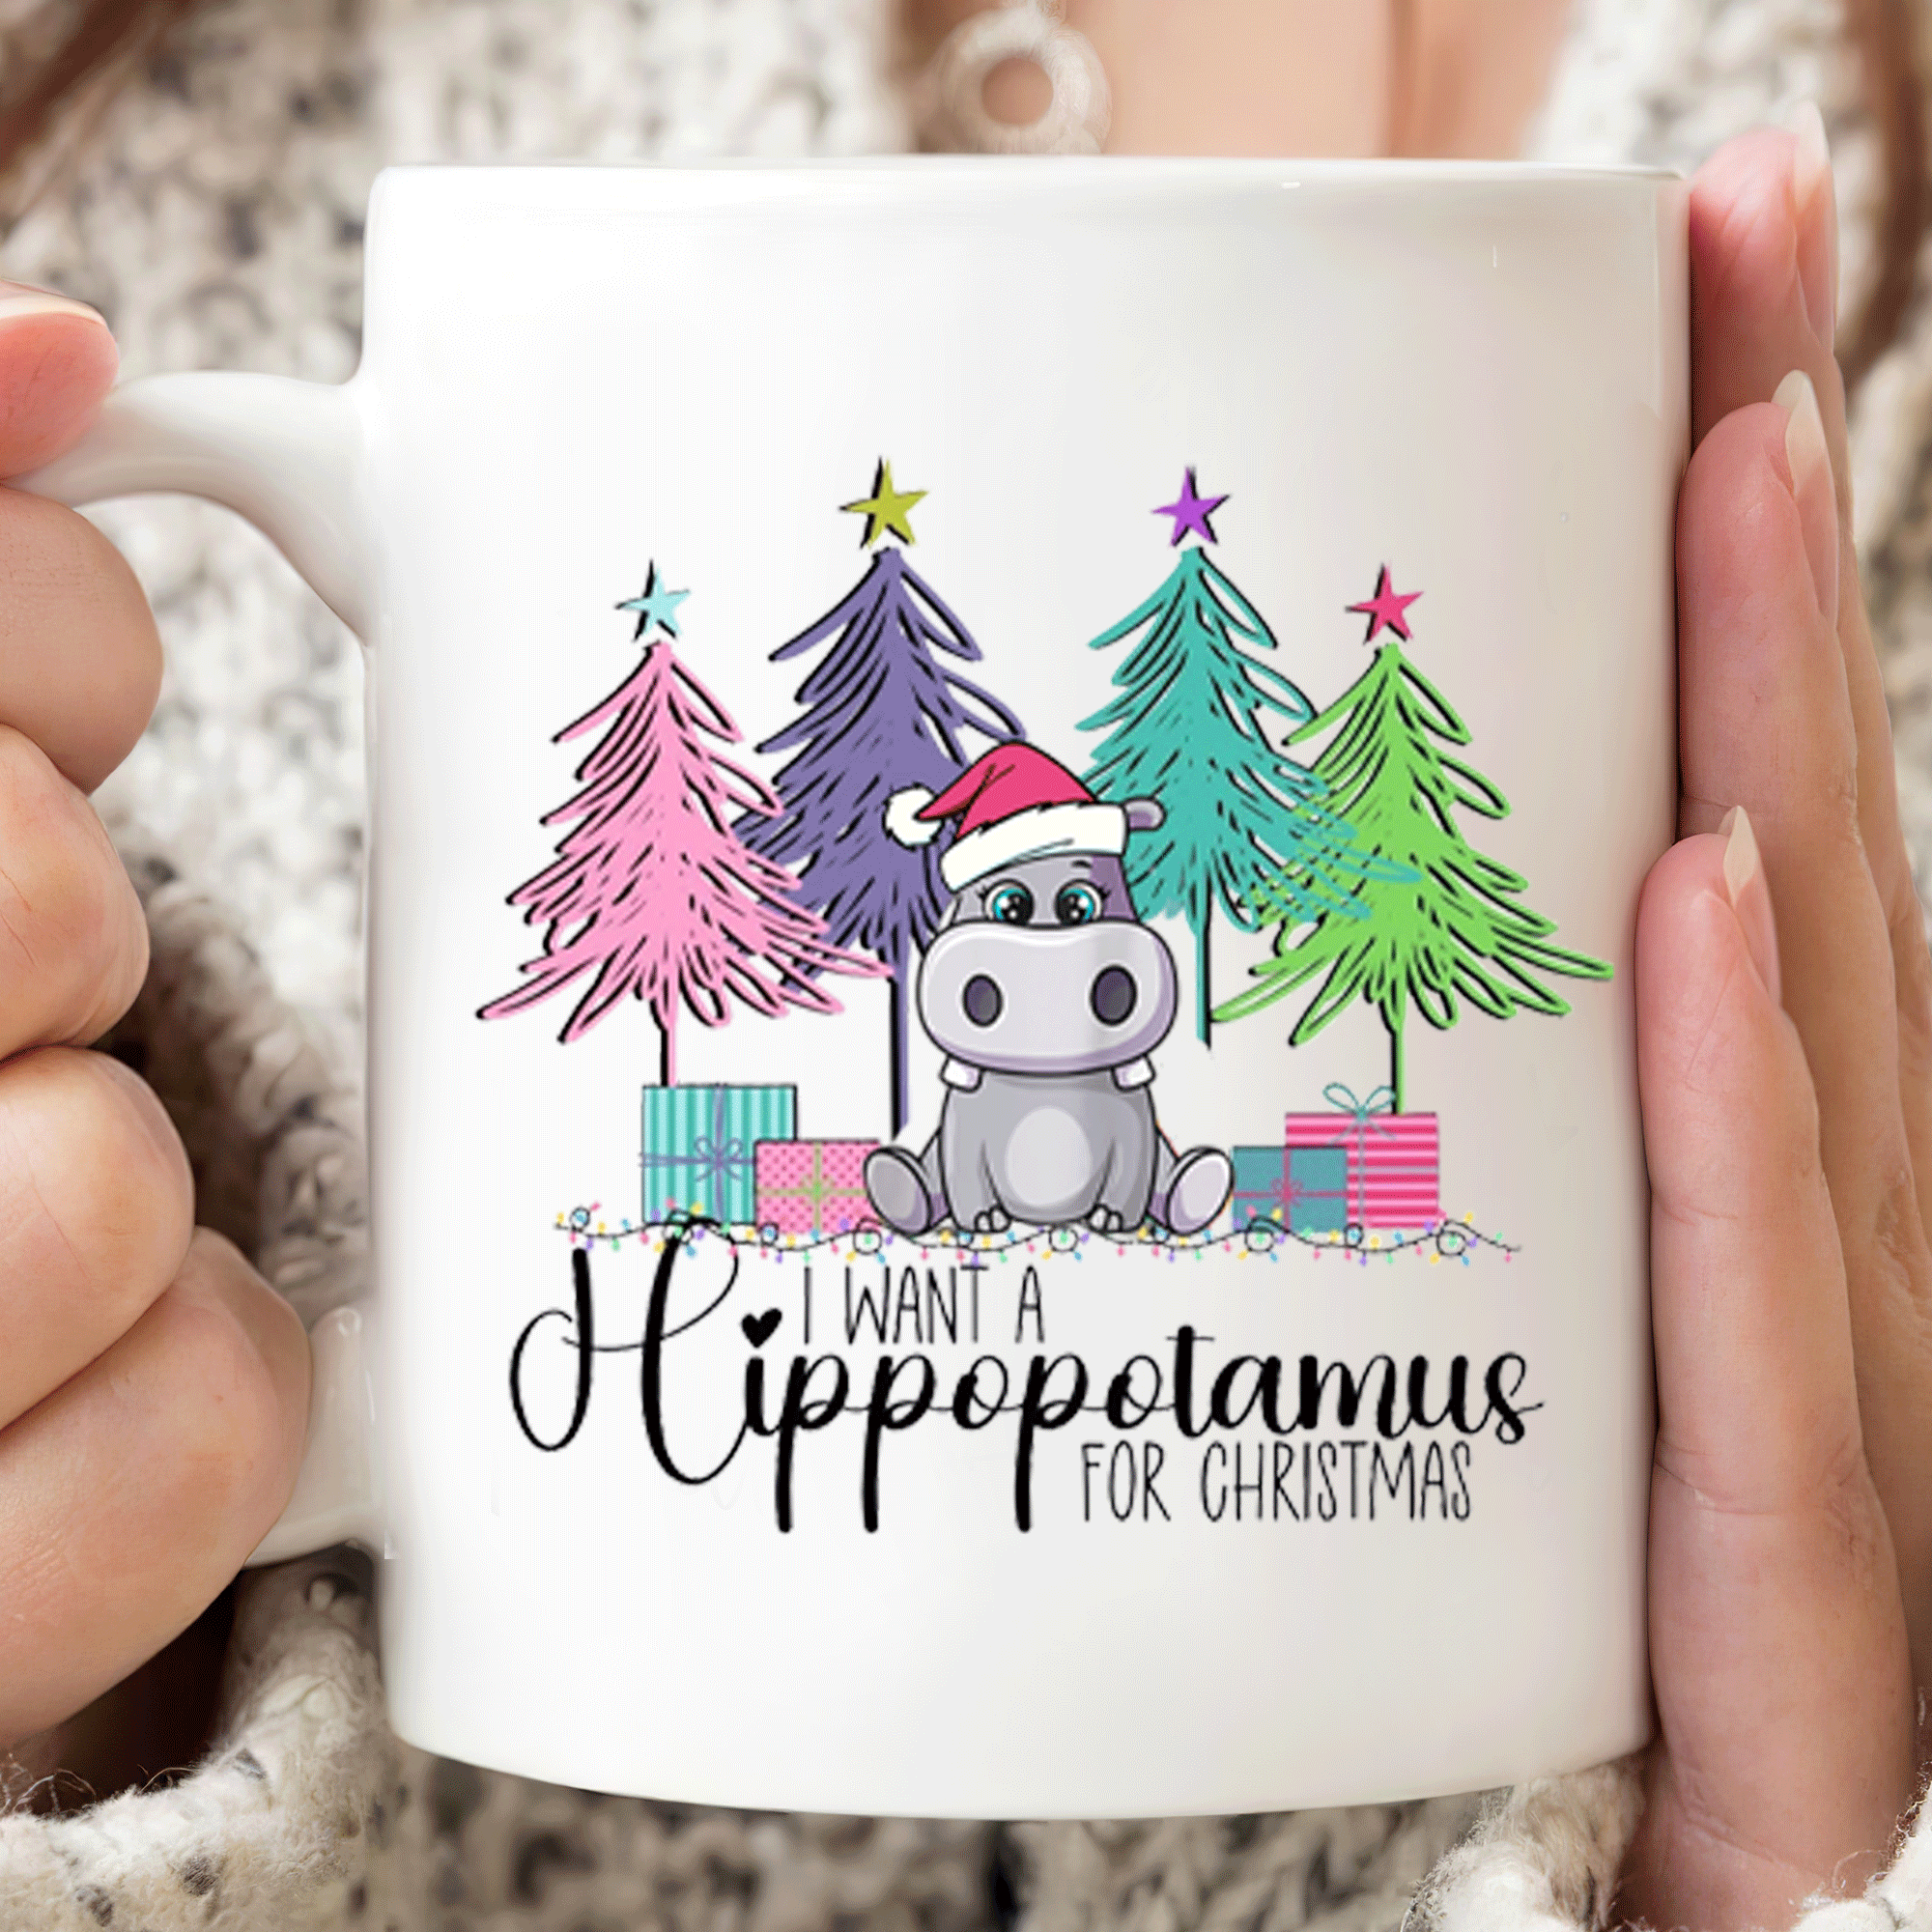 I Want A Hippopotamus For Christmas Mug, Christmas Hippo Mug Gifts For Women For Men, Ceramic Coffee Cup Gifts For Family For Friend On Holiday Christmas